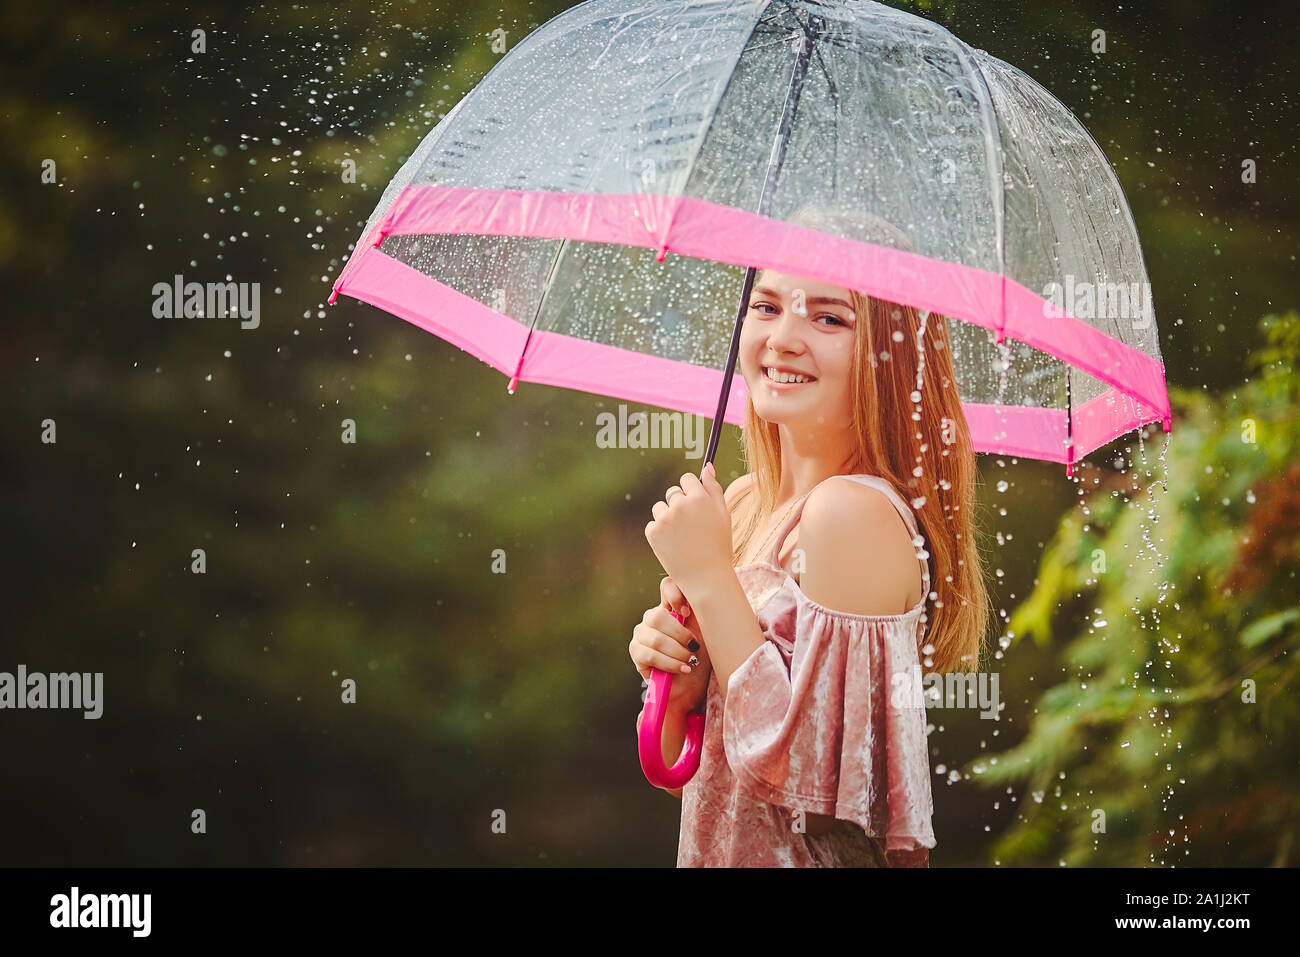 Happy Beautiful Girl With An Umbrella In The Rain During A Forest Walk